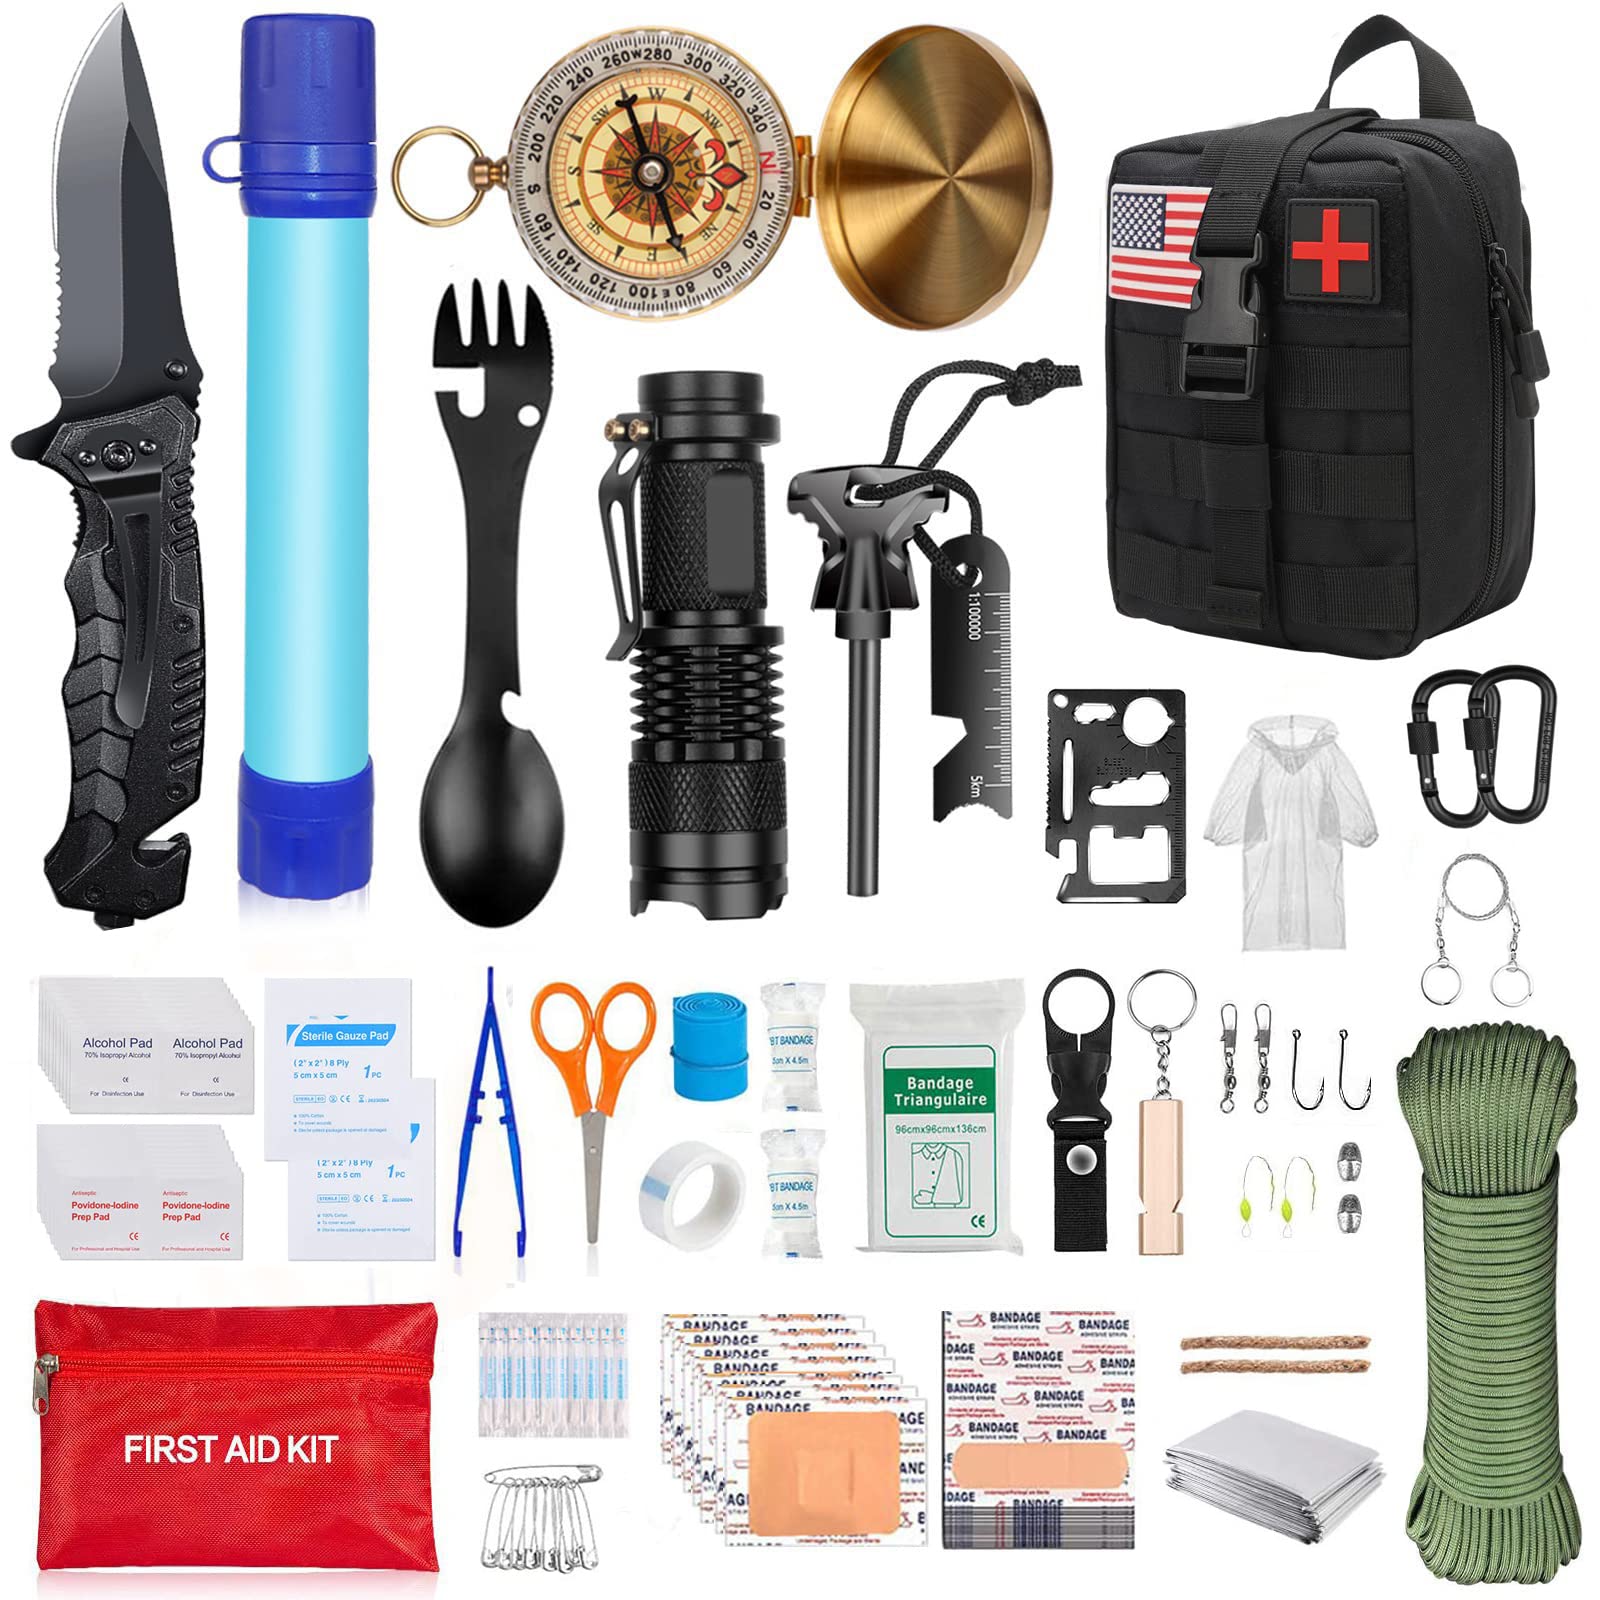 28 In 1 Emergency Survival Gear And Equipment Set For Outdoor Camping  Hiking Fishing Hunting, Birthday Gift For Men Dad Husband